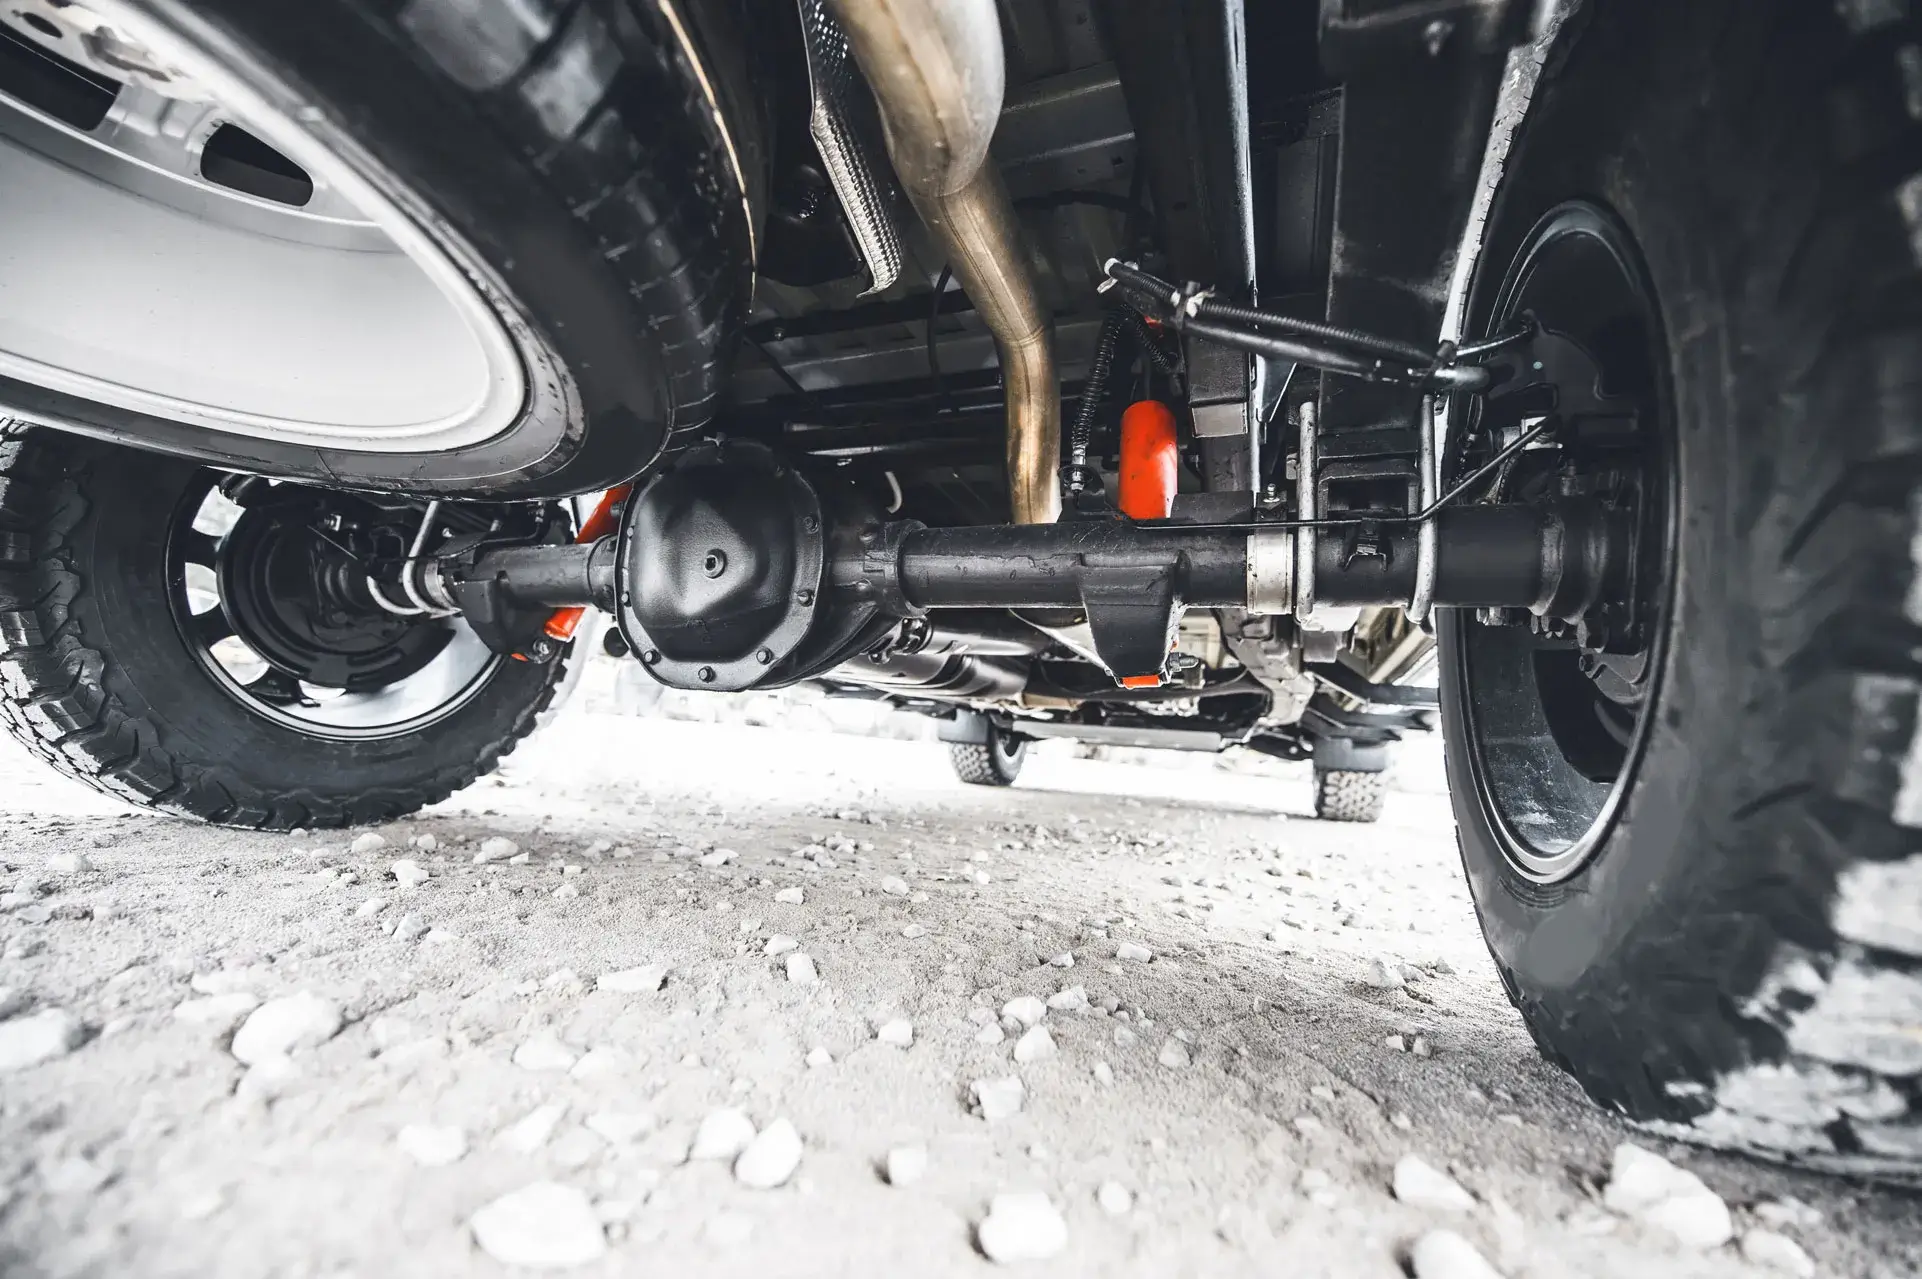 How to Choose a Lift Kit